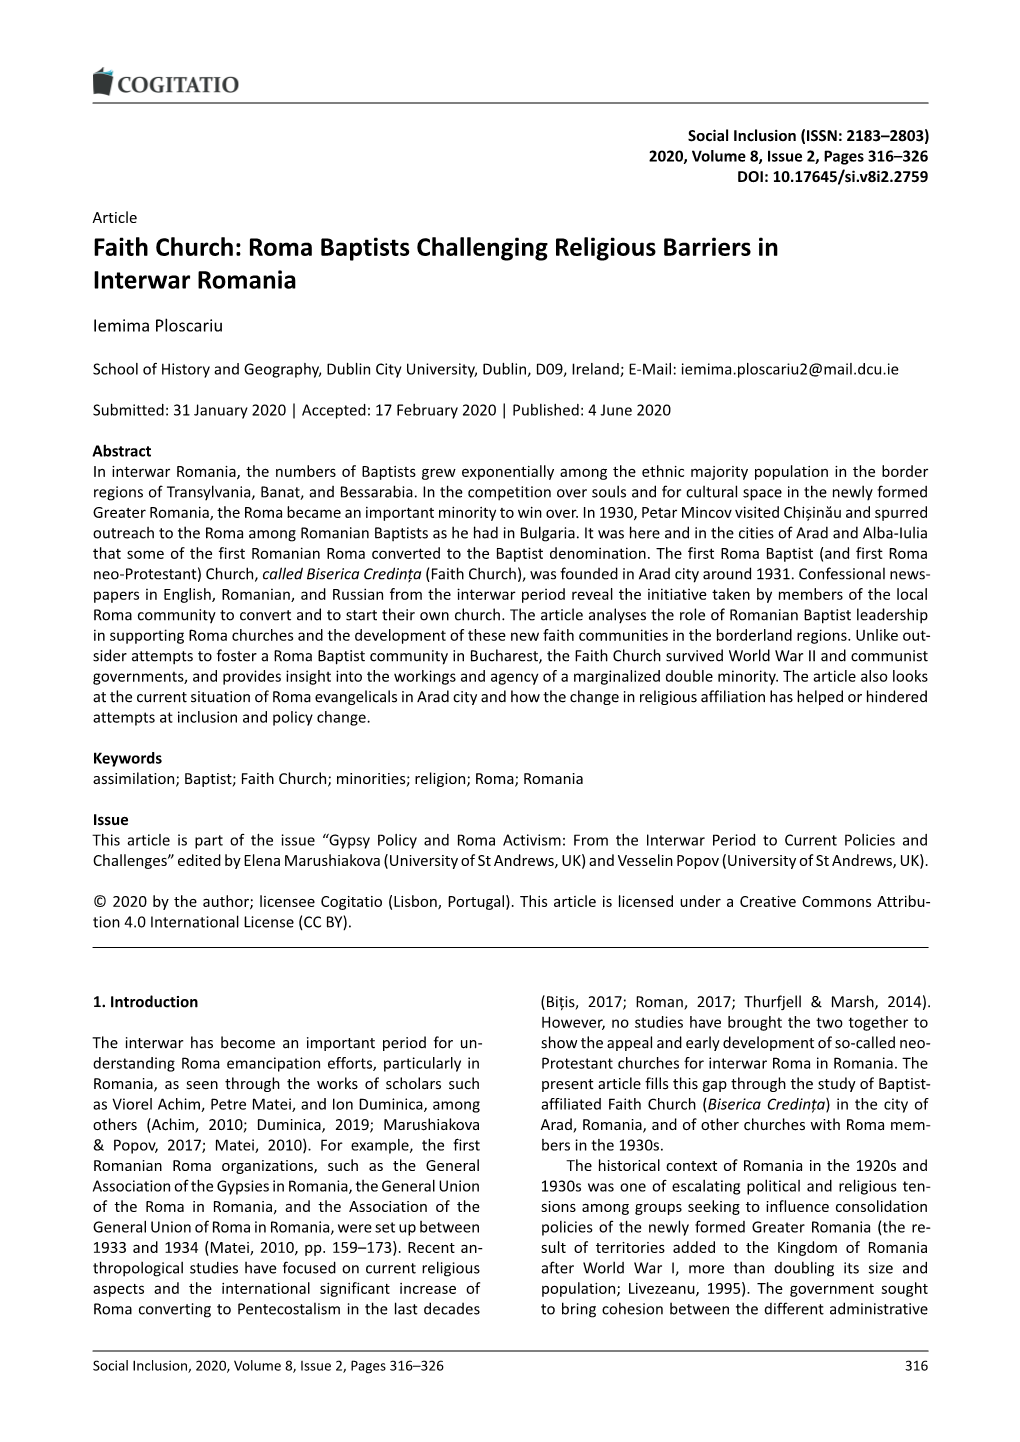 Faith Church: Roma Baptists Challenging Religious Barriers in Interwar Romania